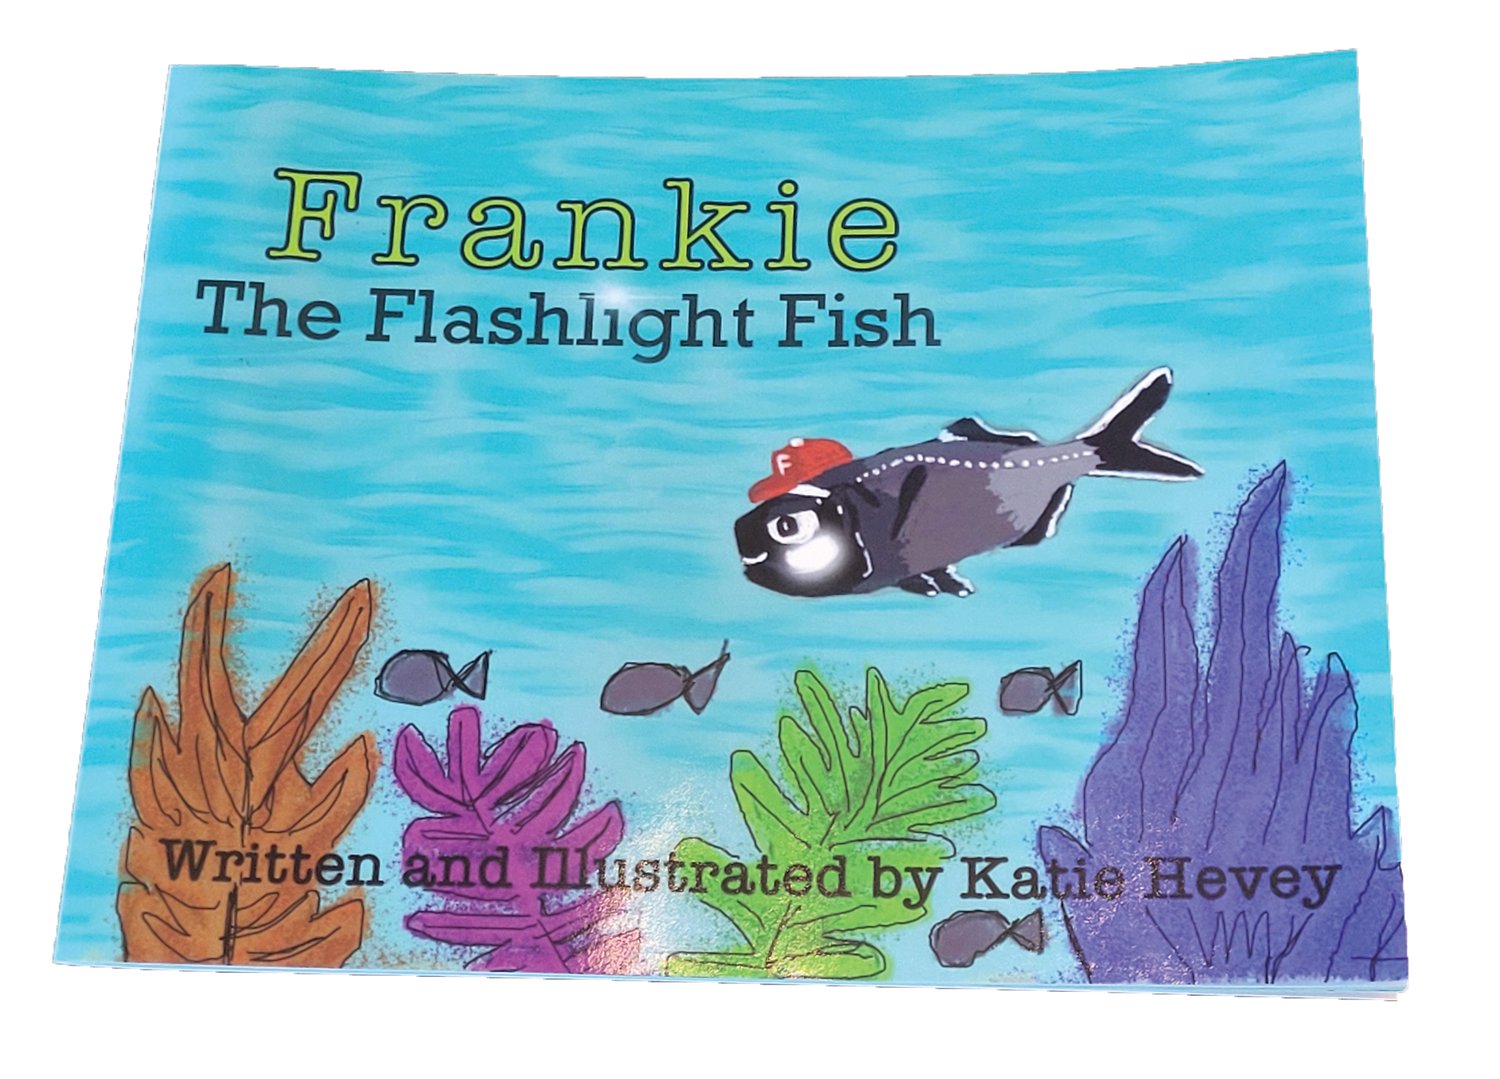 Hevey’s second book “Frankie The Flashlight Fish” has been released through Pen It! Publications. Both of her books are available at www.katiehevey.com, and for online purchase at Amazon and Barnes & Noble.